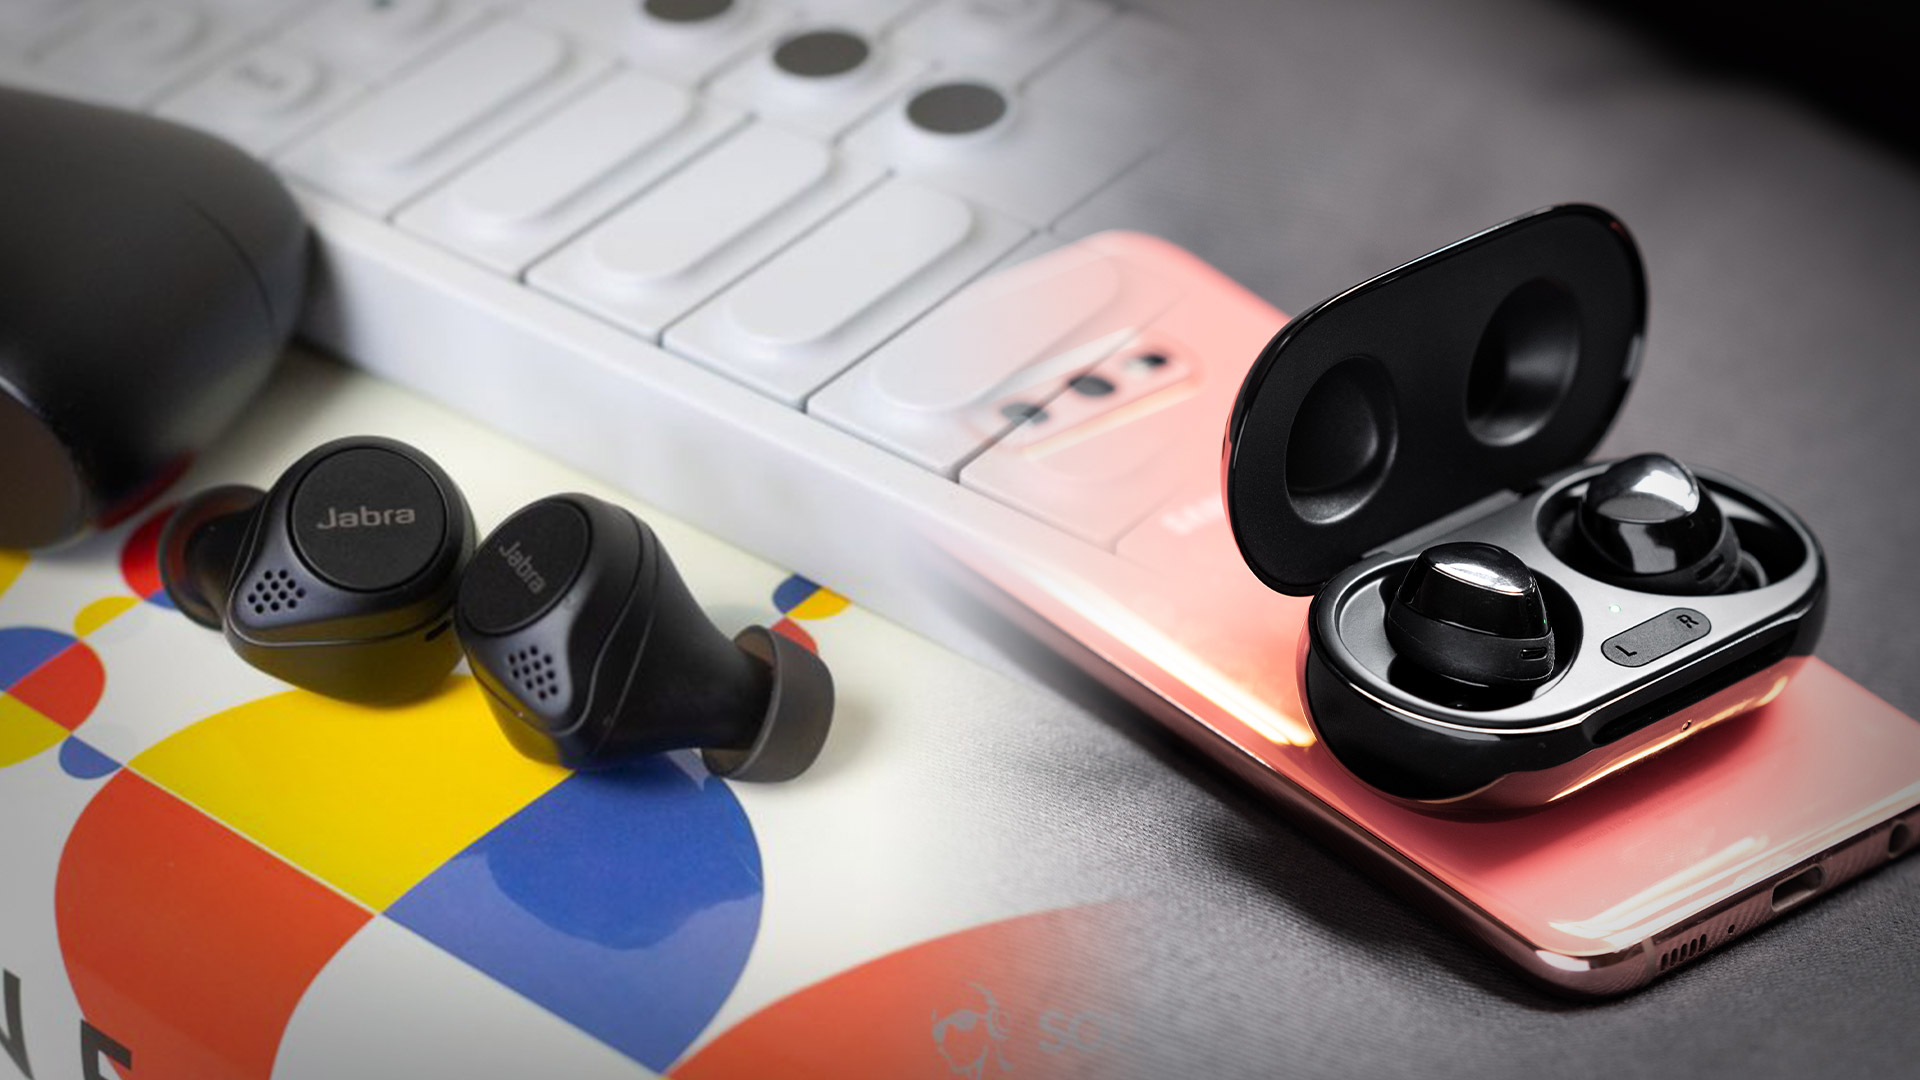 A blended image of the Samsung Galaxy Buds Plus vs Jabra Elite 75t true wireless earbuds.